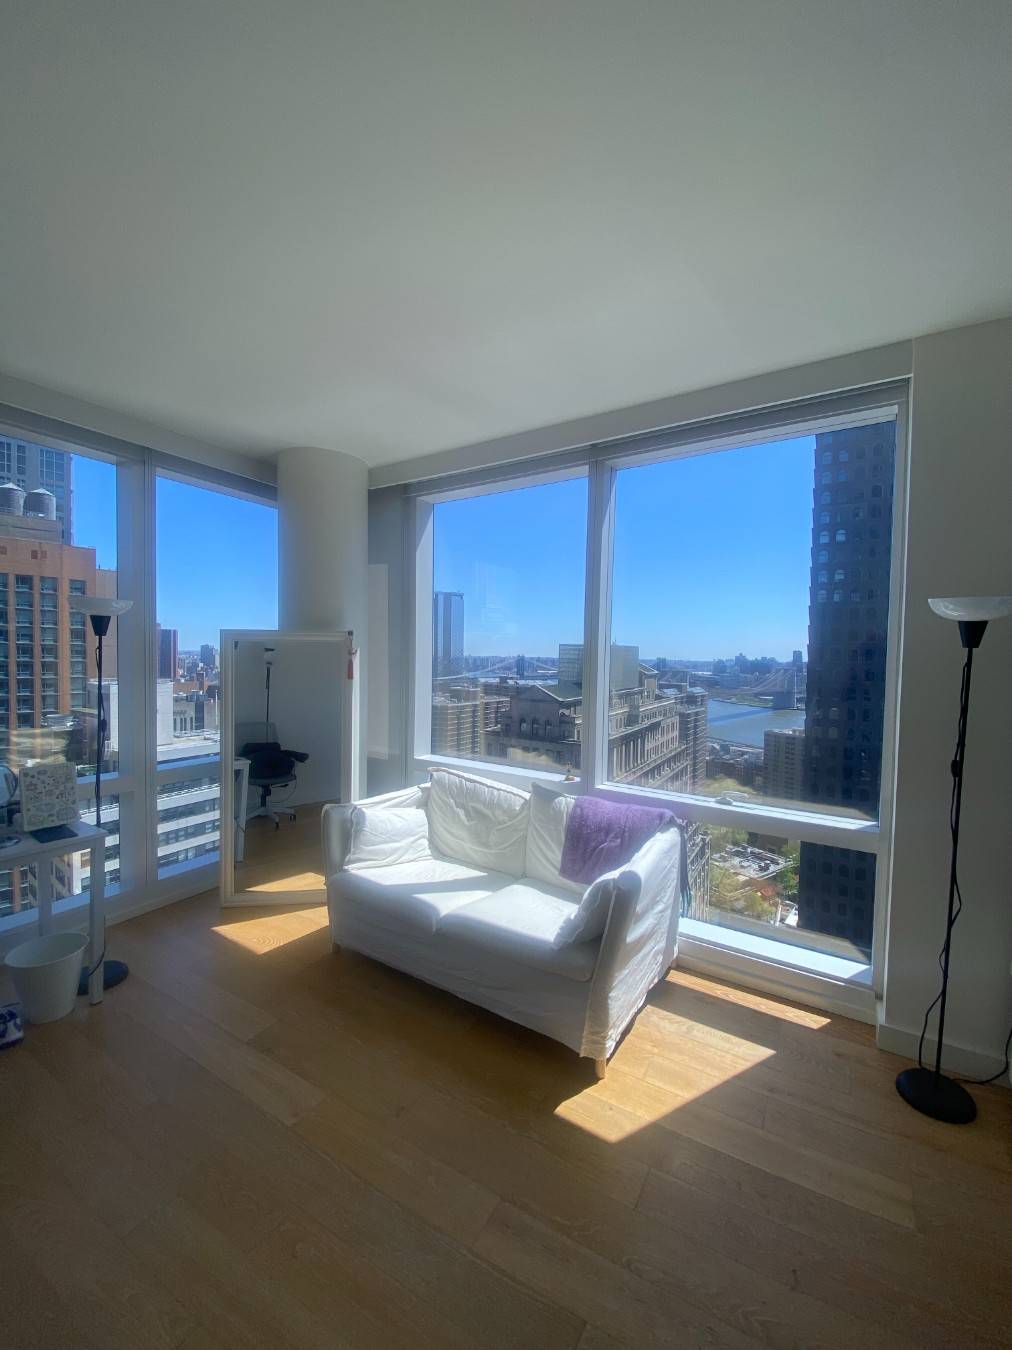 NEW TO MARKET Amazing 1 bed with stunning city views, W D in unit, Stainless appliances.